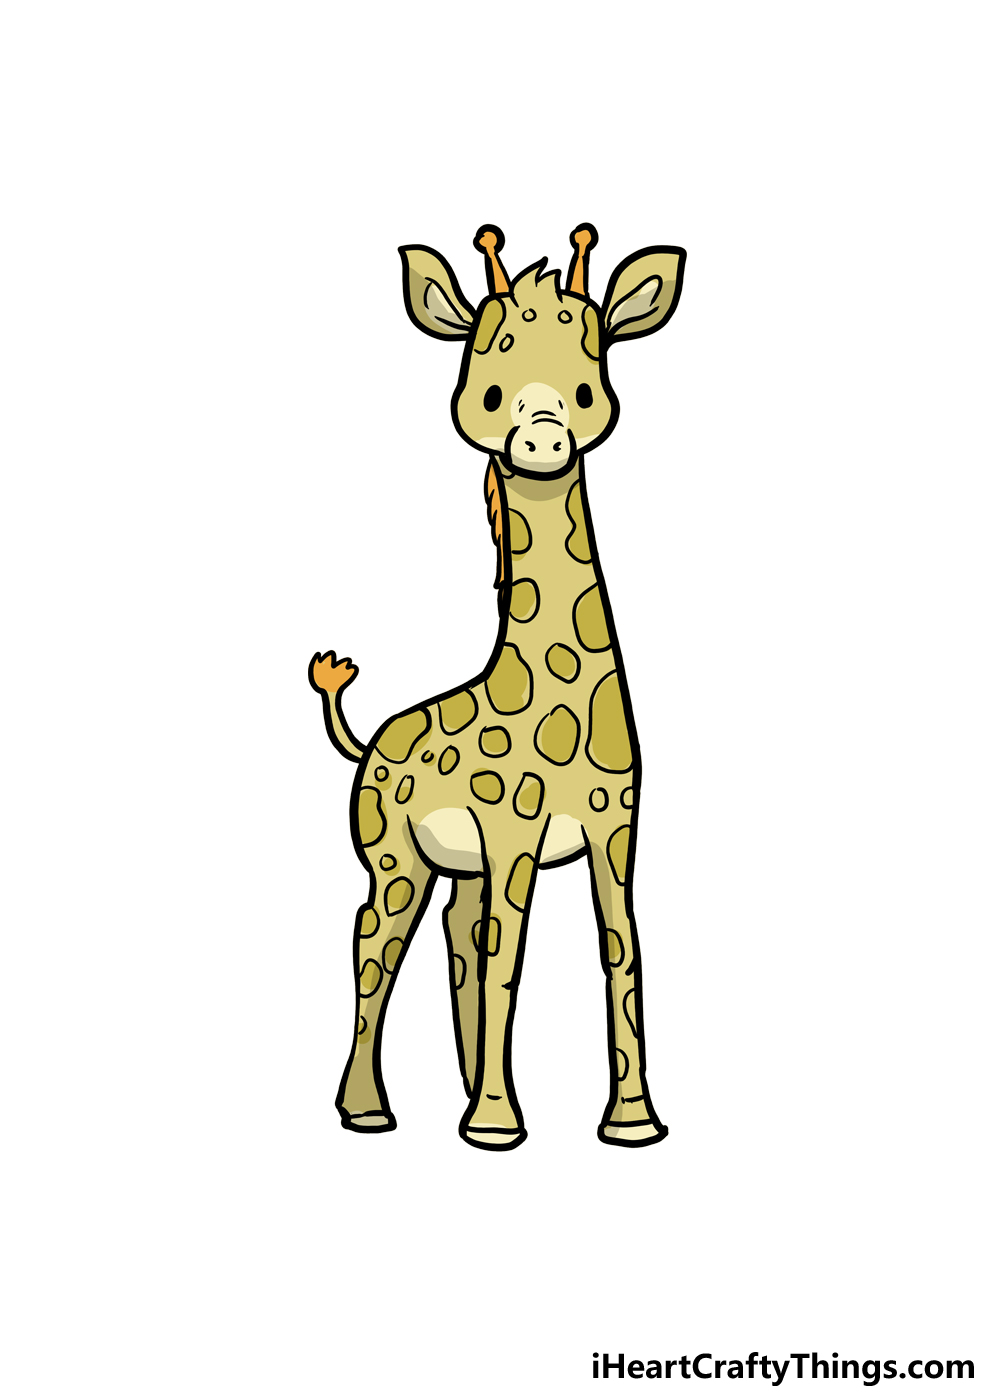 Giraffe Clipart Black And White Lineart Giraffe Kneeling Sitting Cute Hand  Drawn, Giraffe Drawing, Giraffe Sketch, Black And White PNG Transparent  Clipart Image and PSD File for Free Download